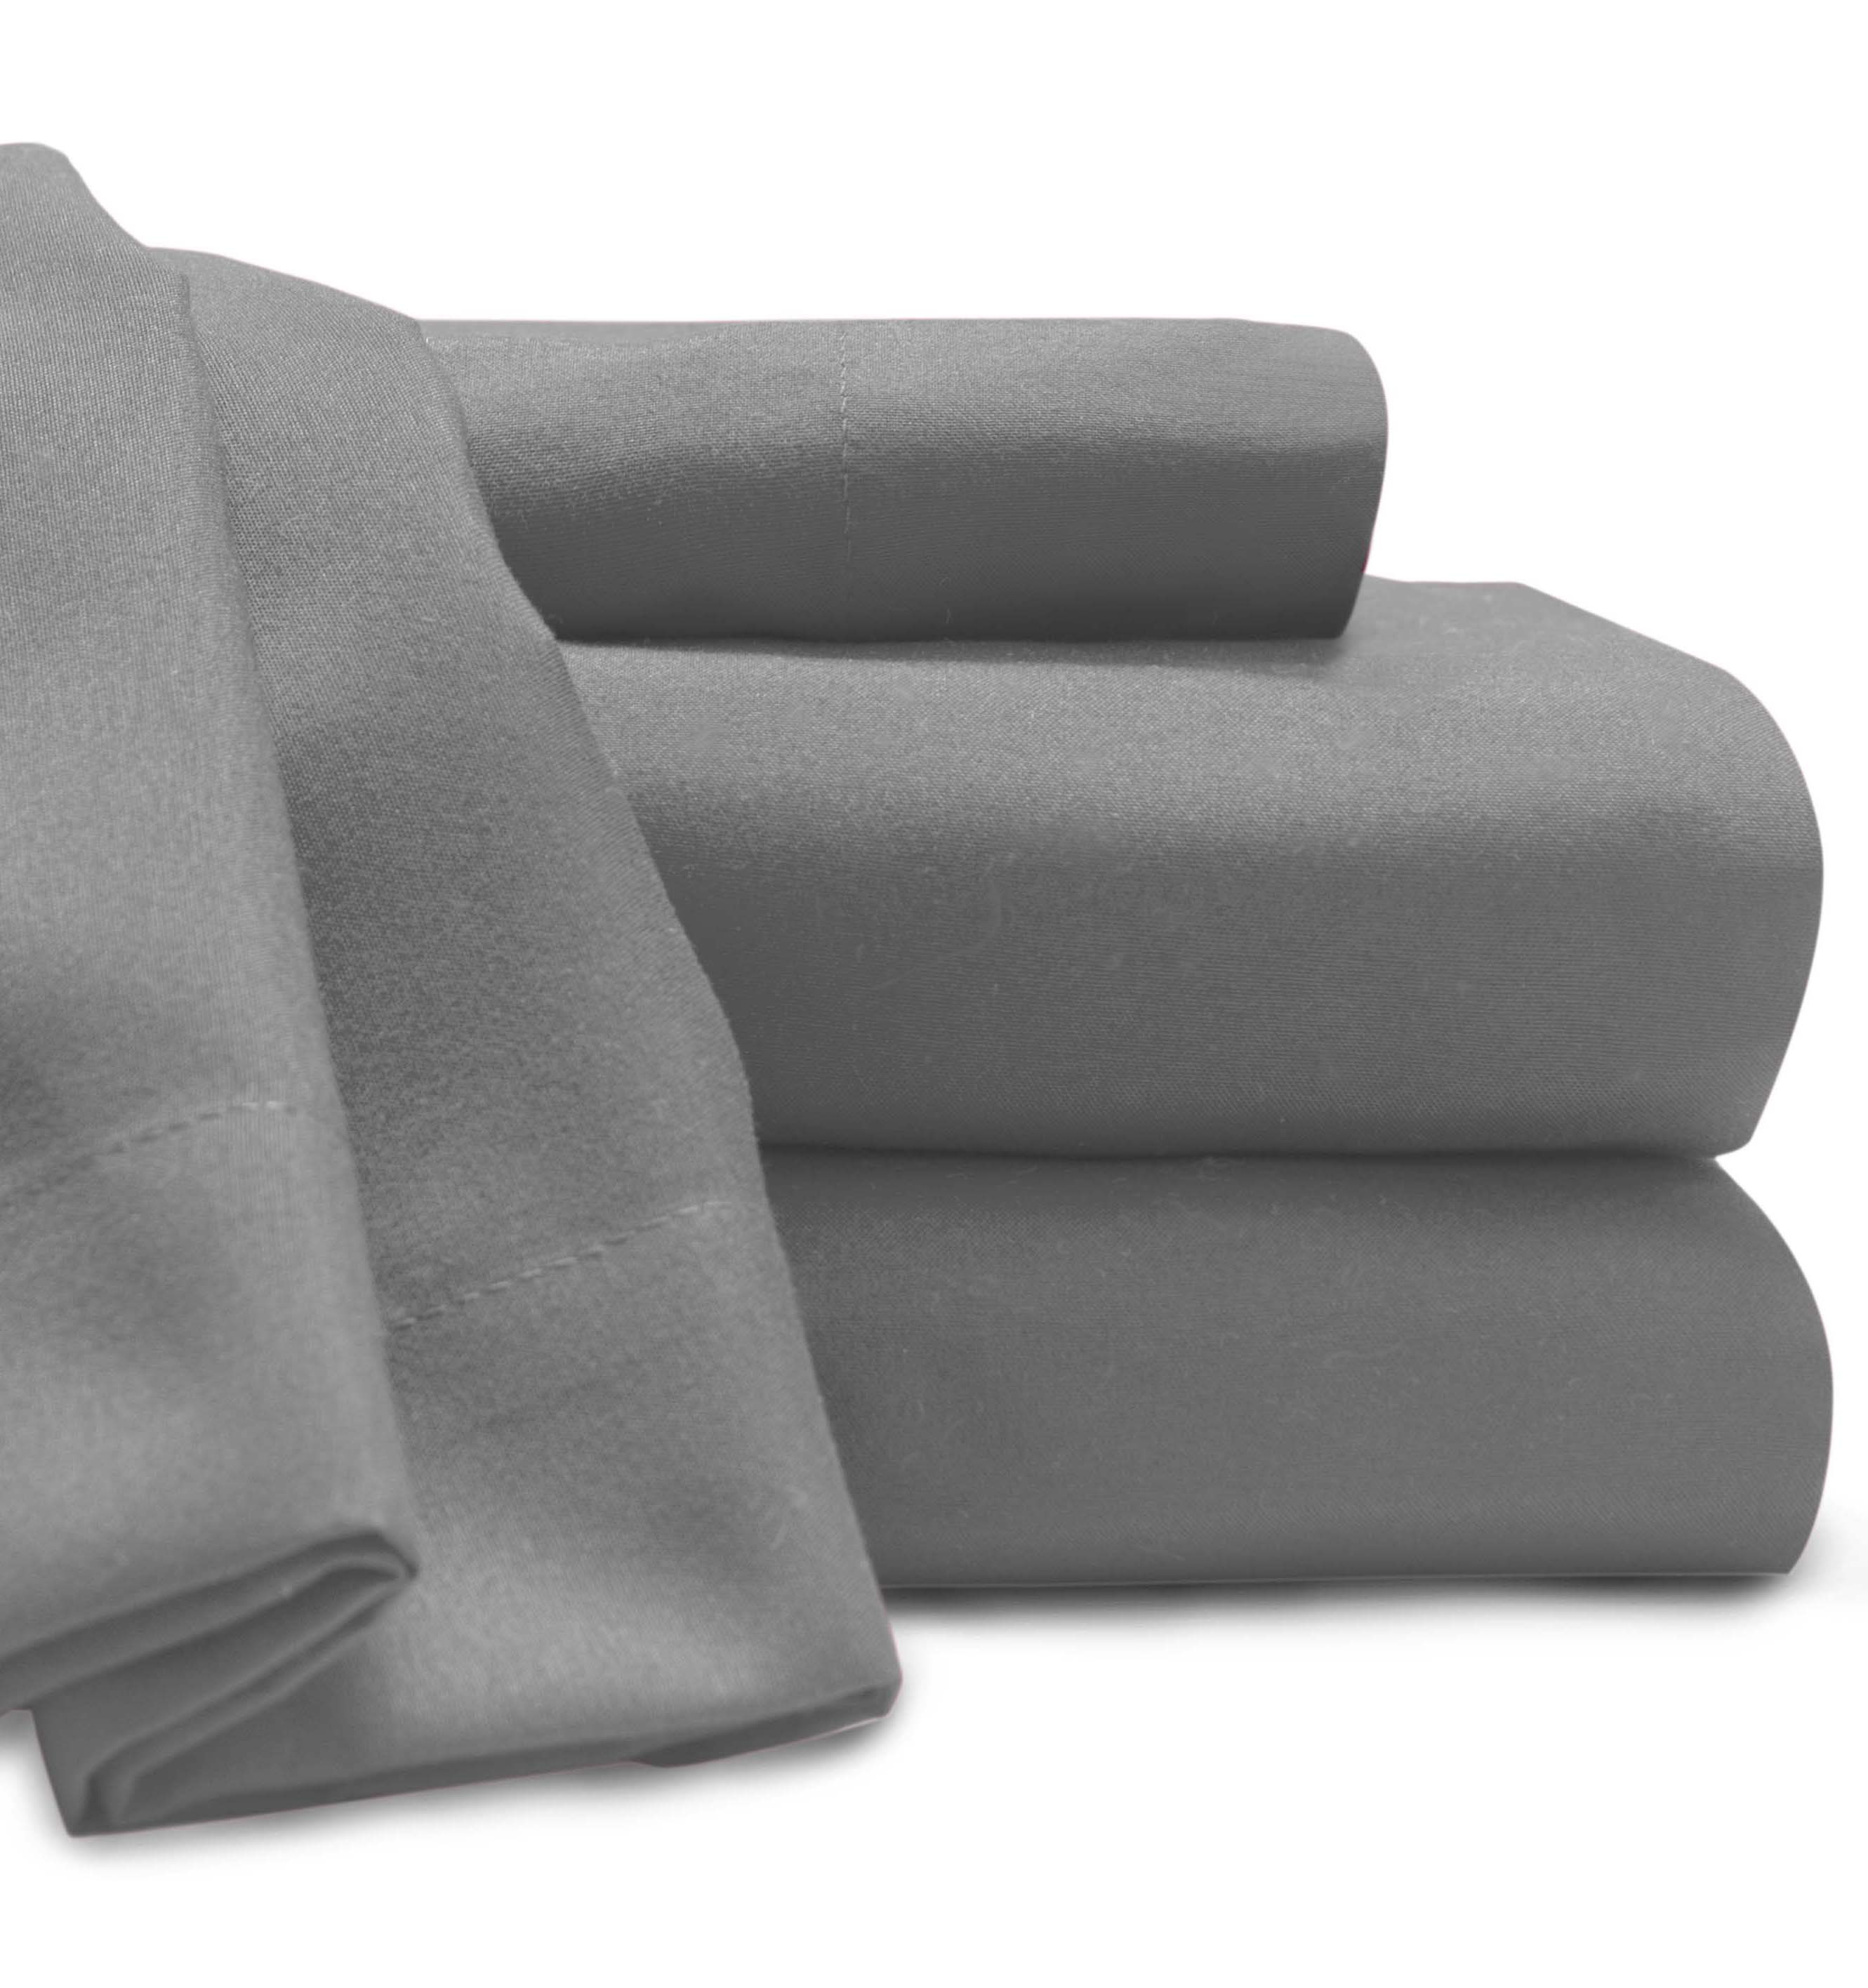 Soft and Cozy Easy Care Deluxe Microfiber Sheet Set-Baltic Linen-Silver-Twin-XL-Polyester - image 2 of 4